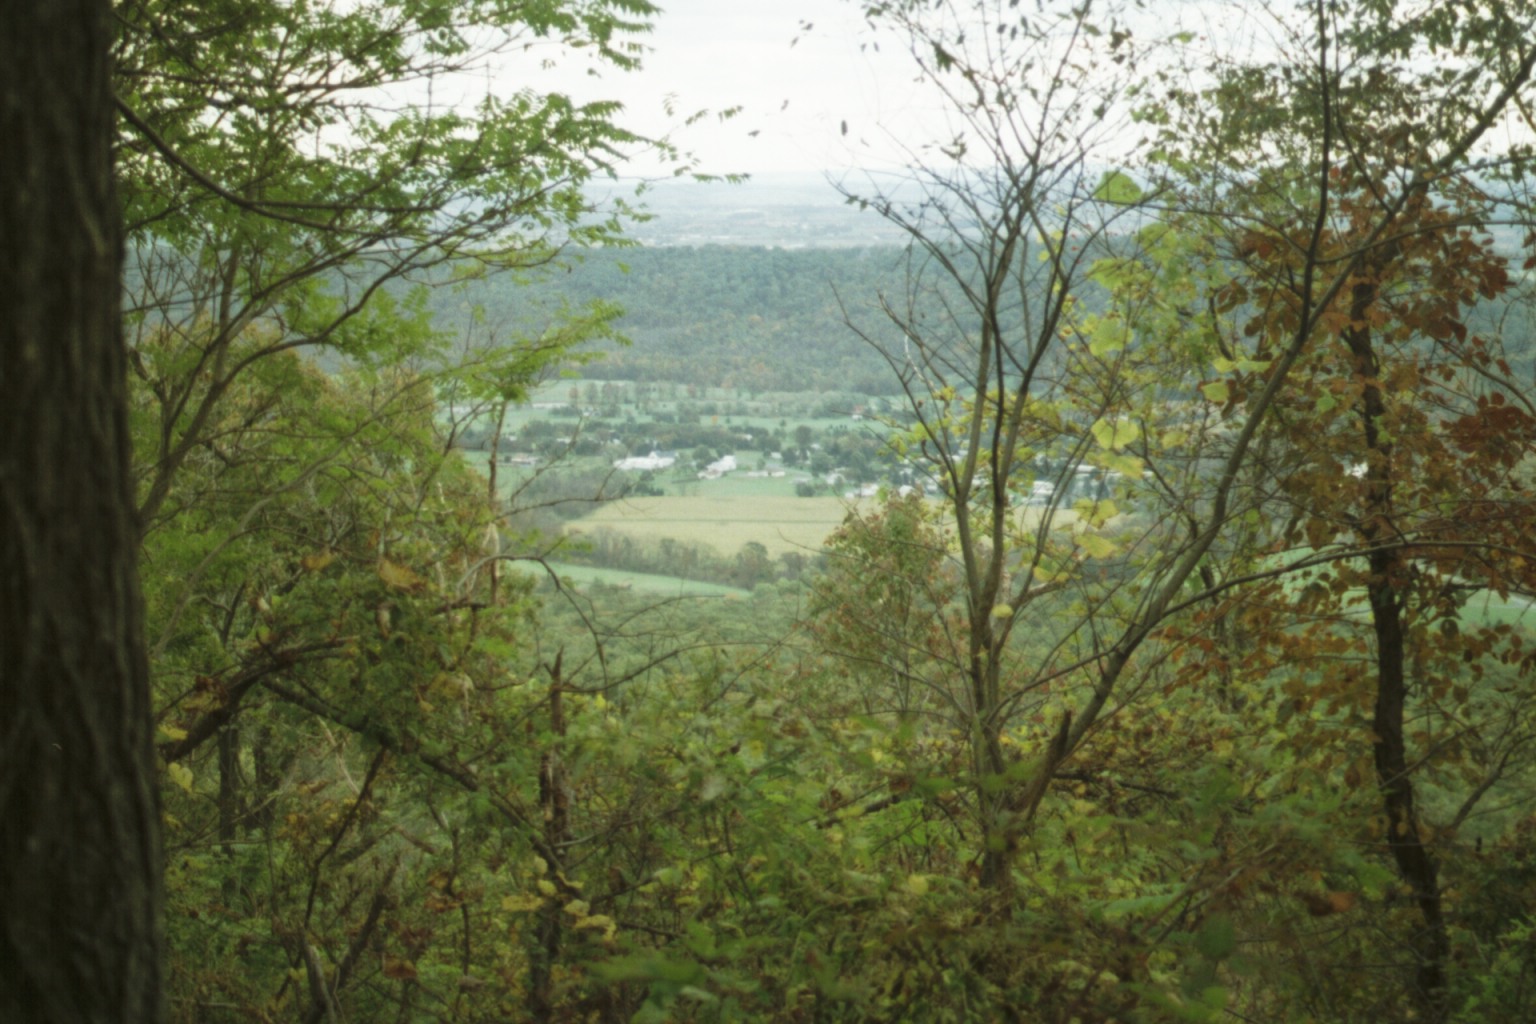 Trail views north of Swatara Gap - south of William Penn Shelter. Courtesy at@rohland.org